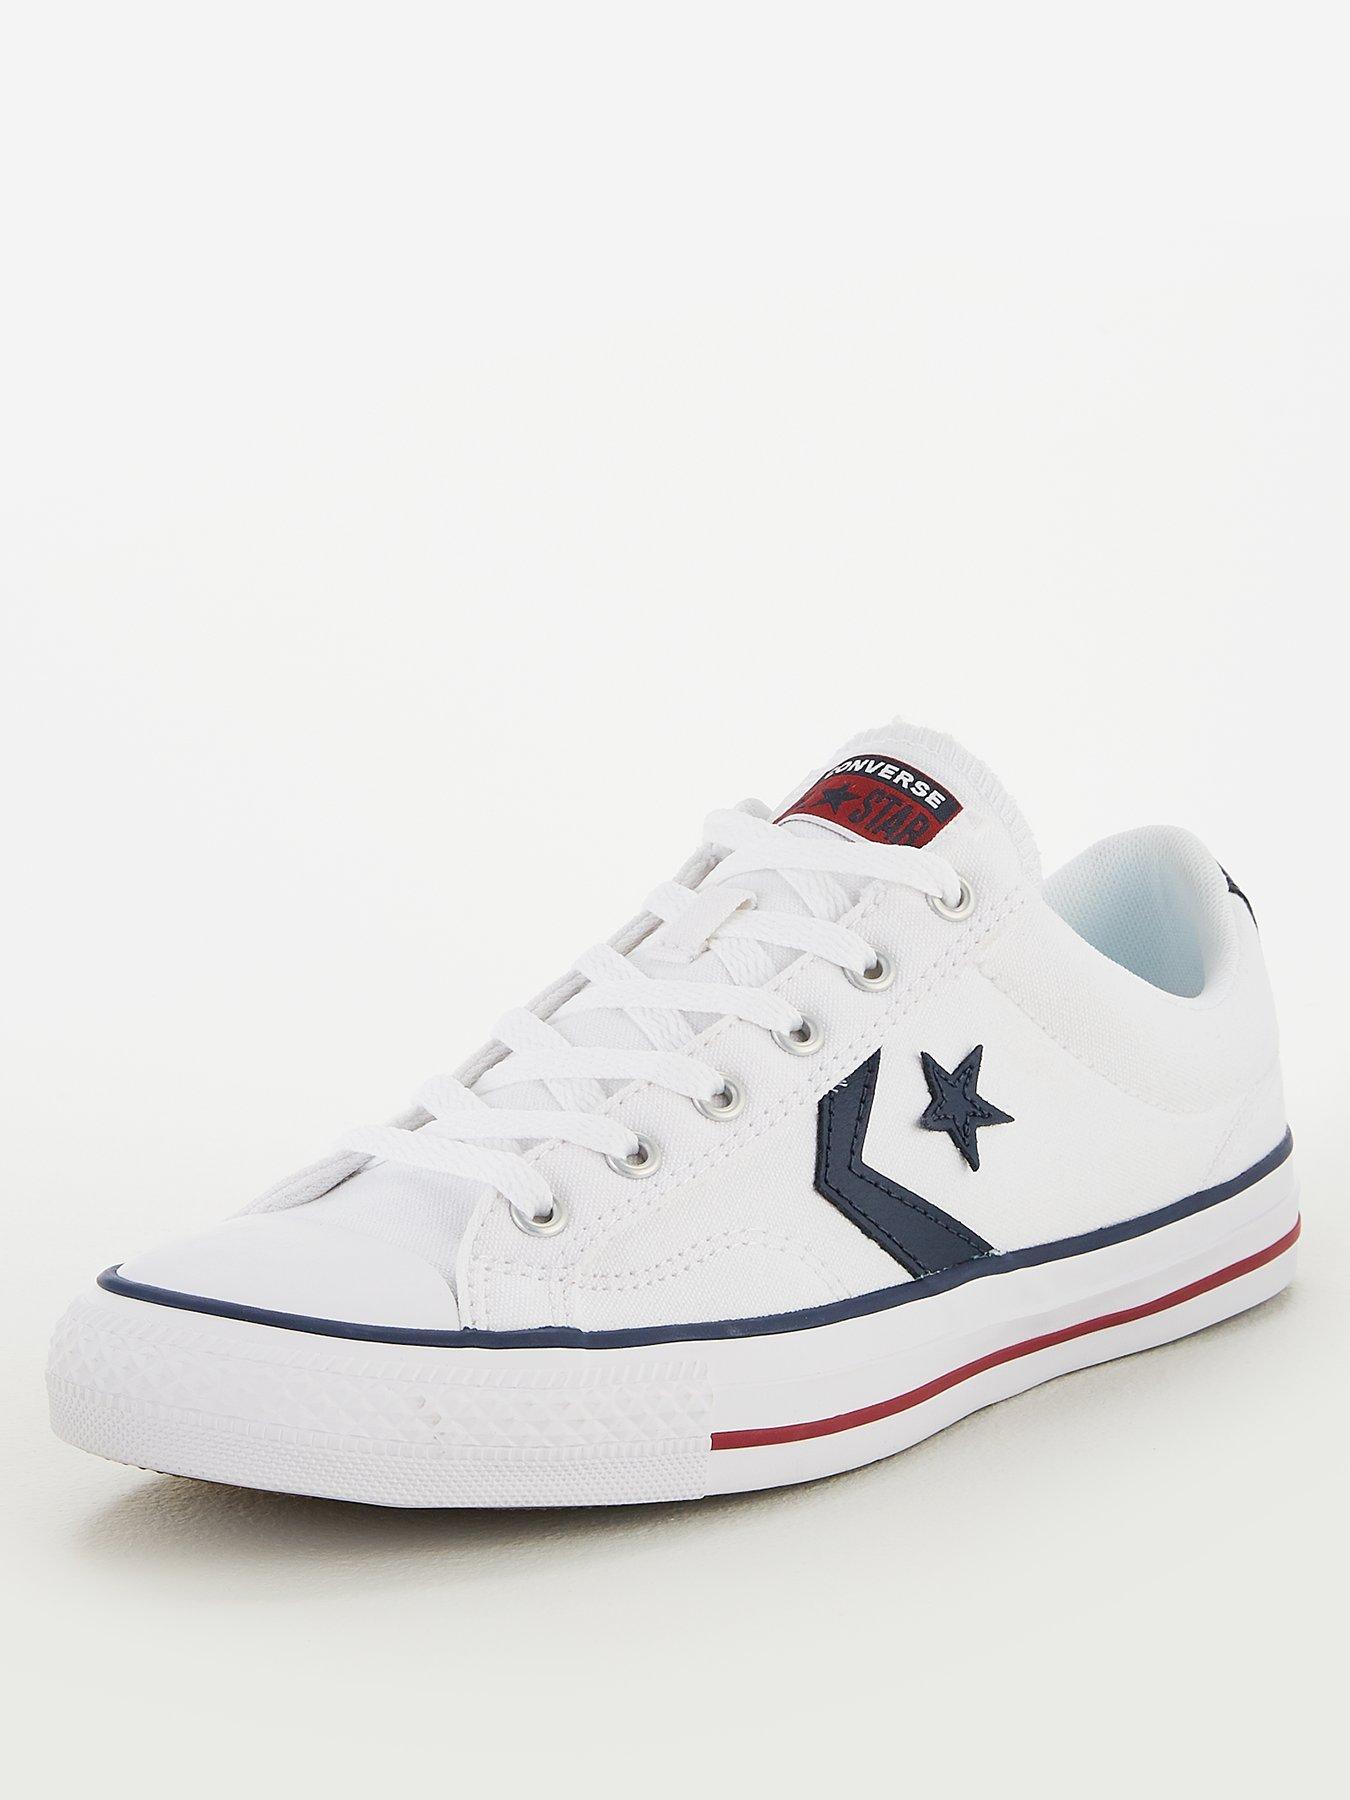 converse star player trainers in white